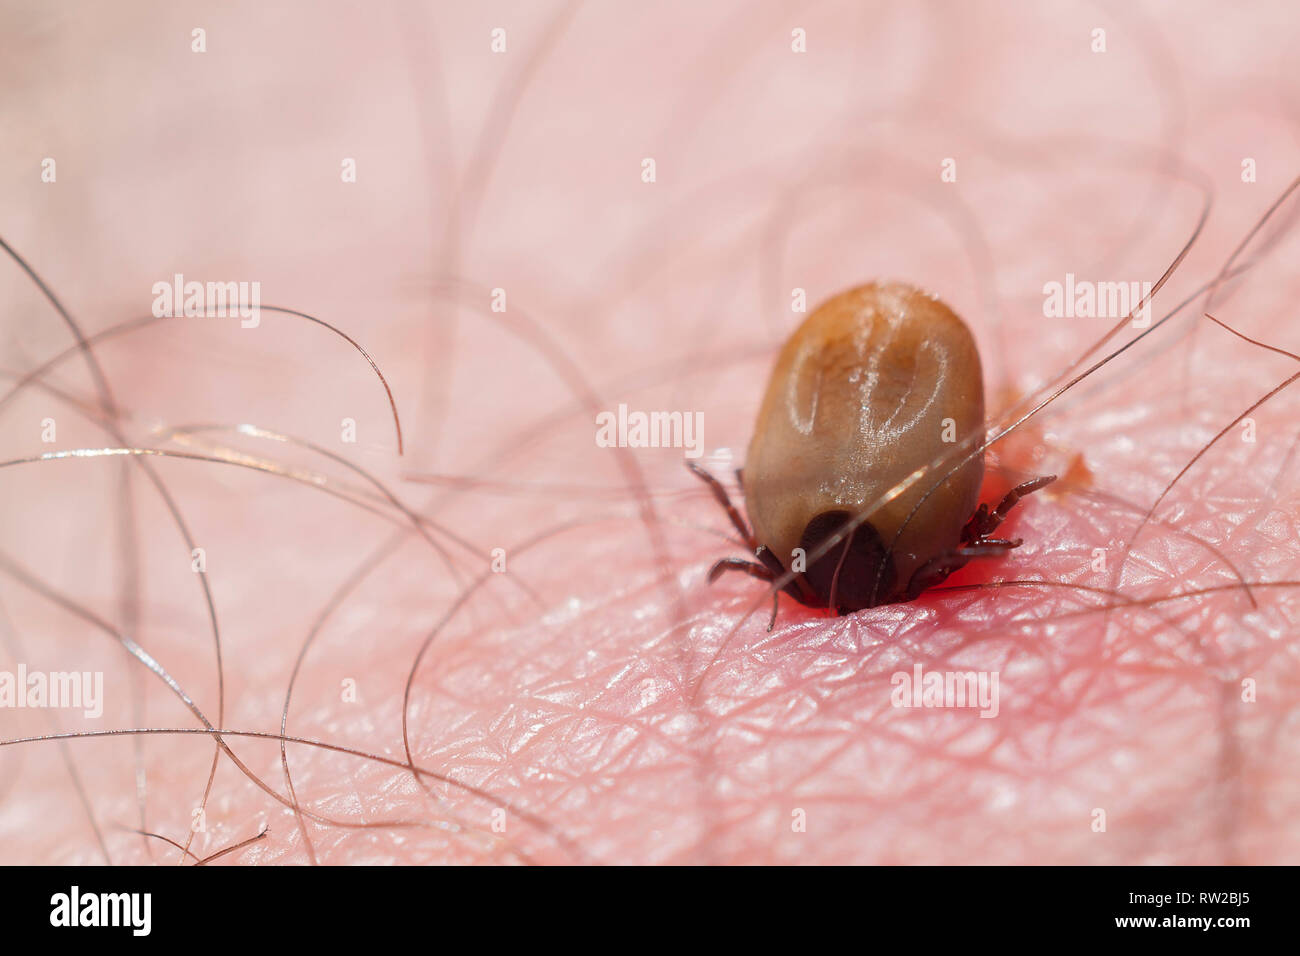 Tick on human skin: a tick while sucking blood from a human being Stock Photo